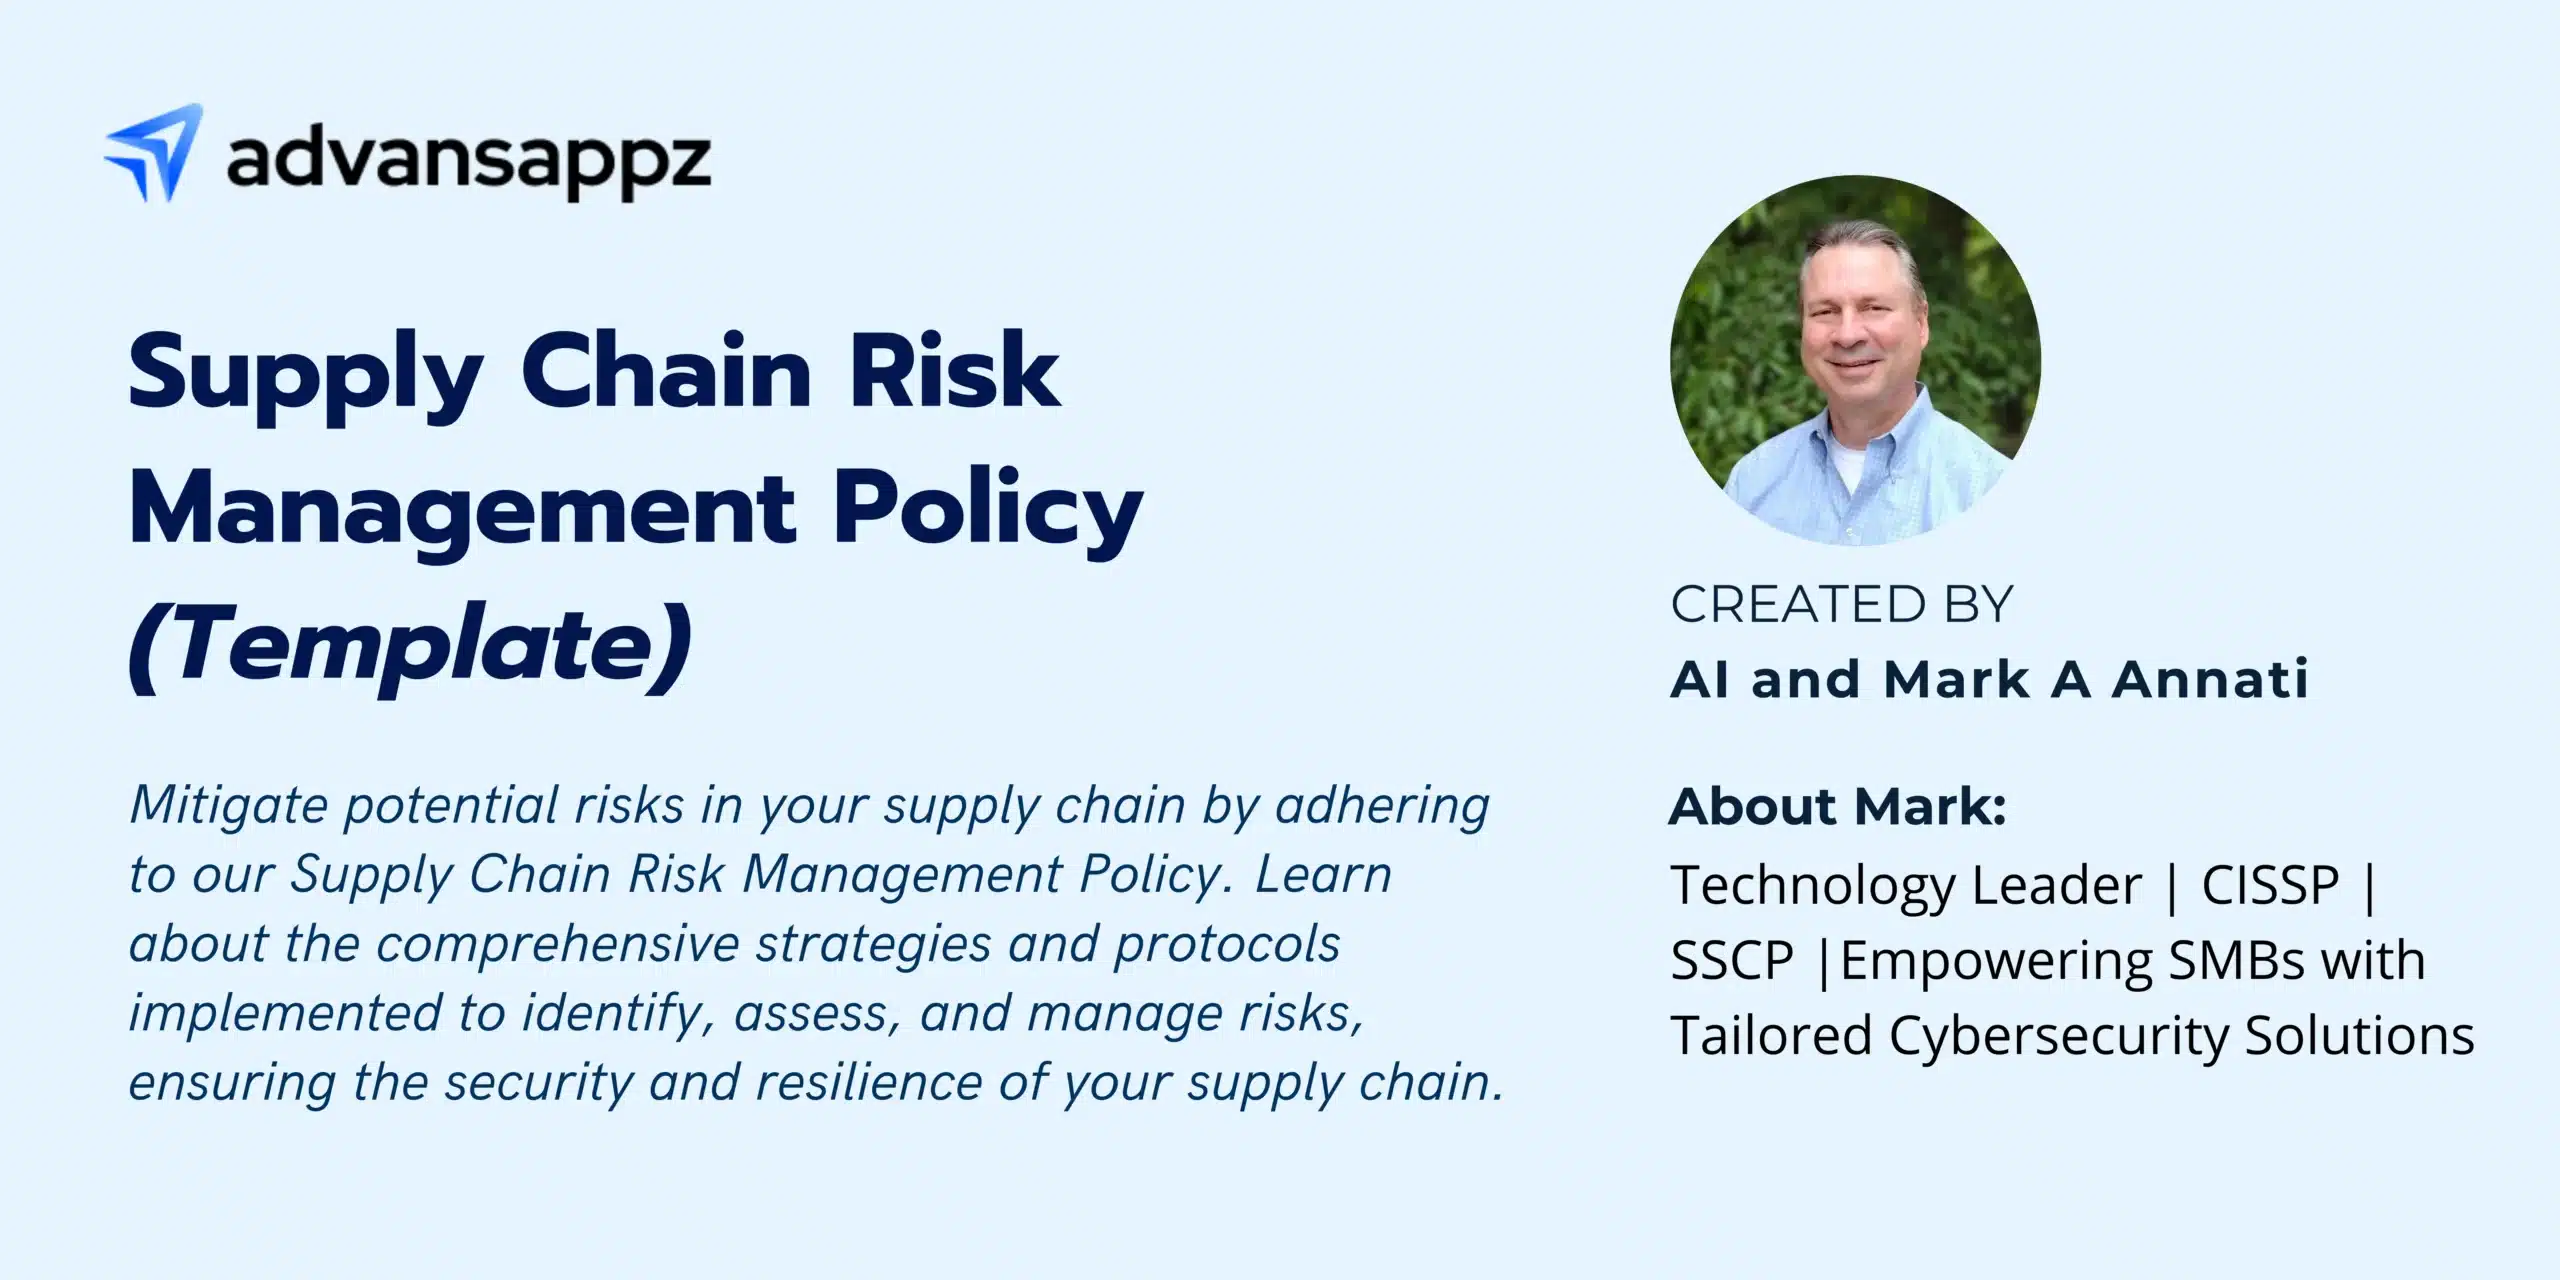 Supply Chain Risk Management Policy